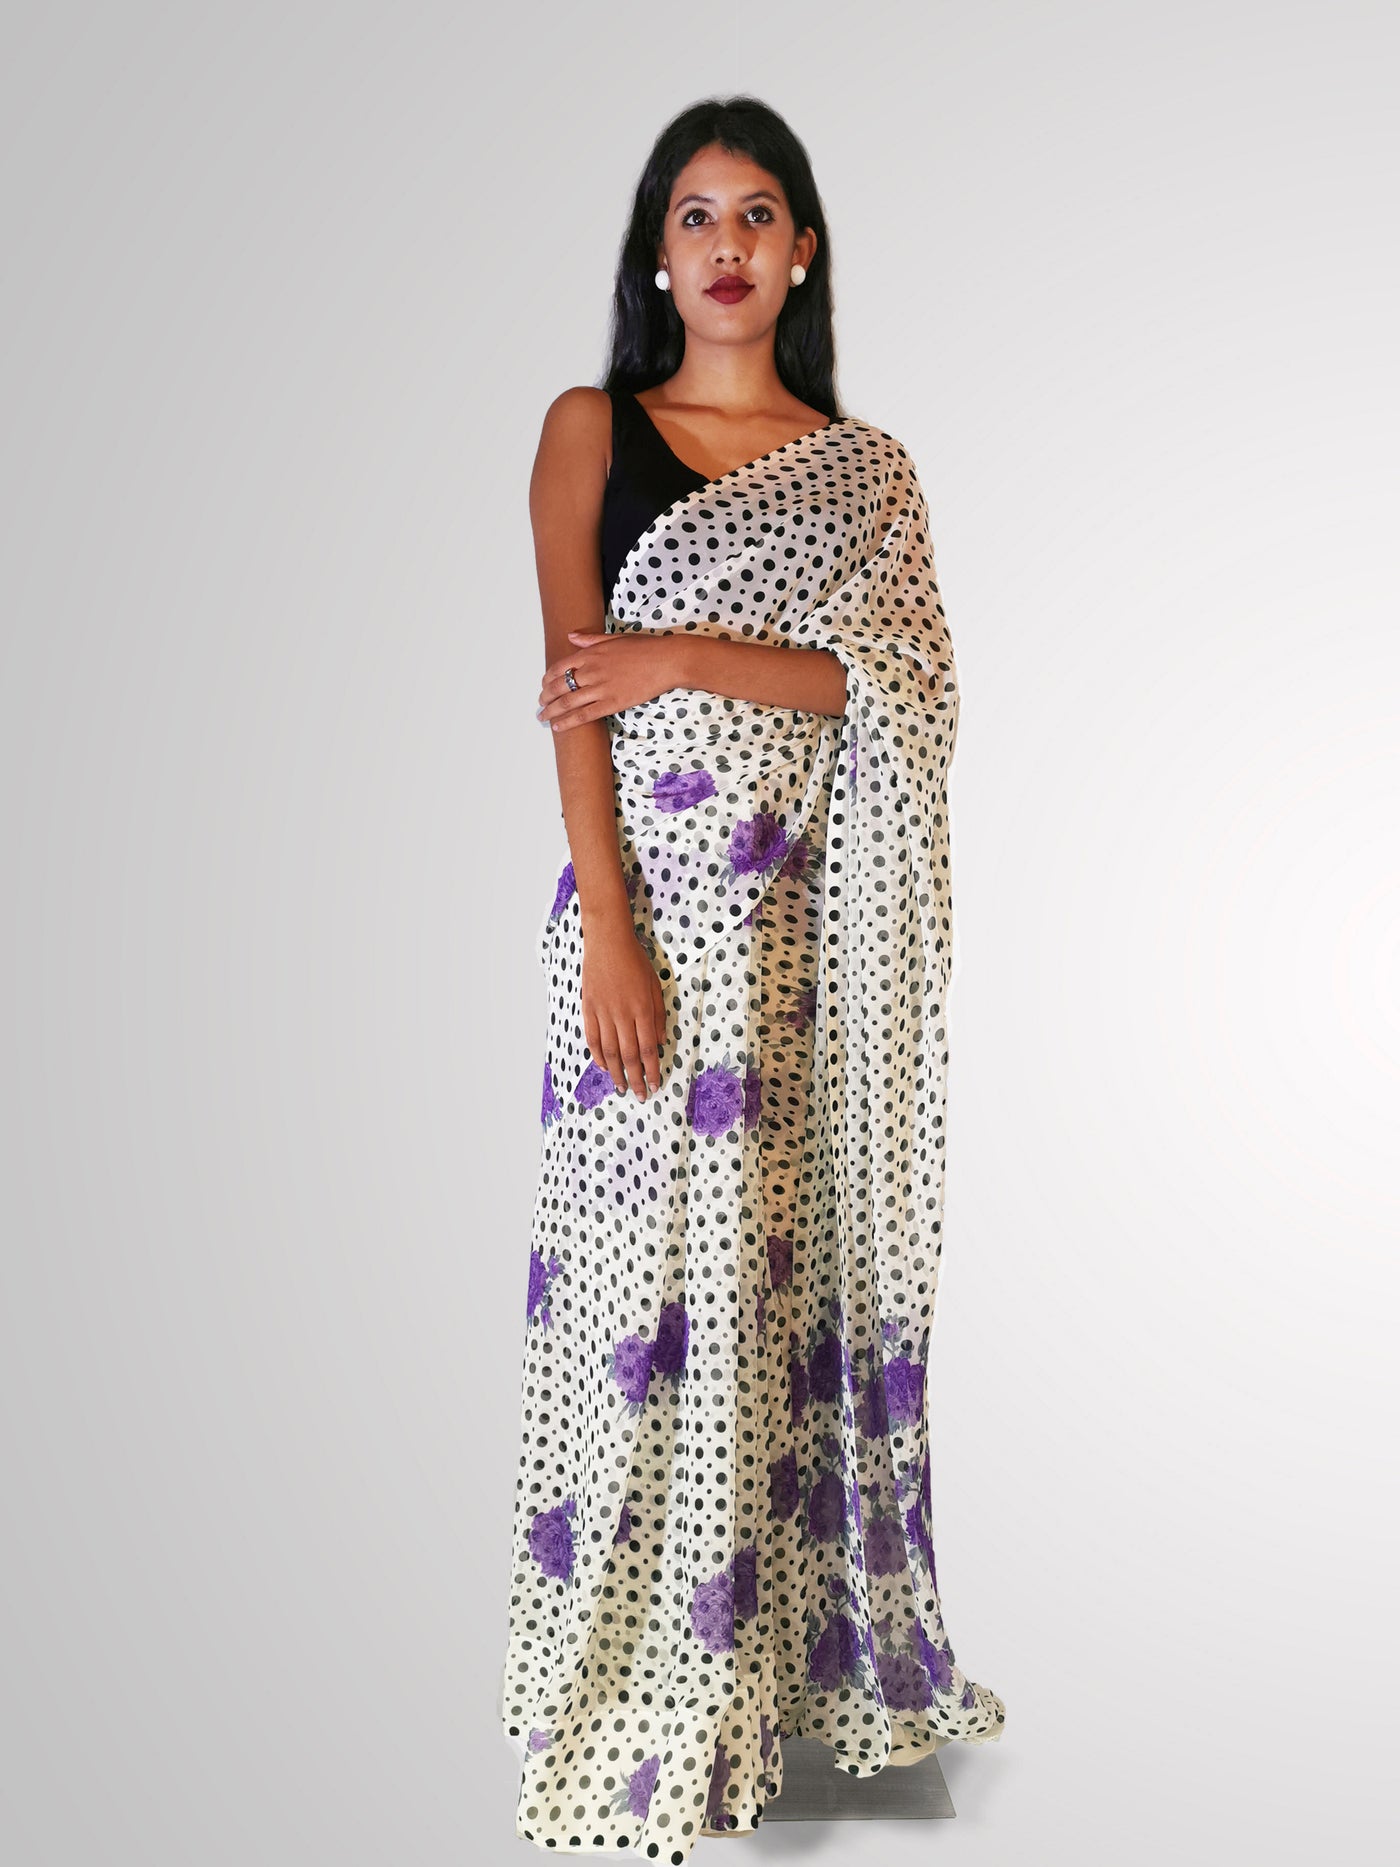 Polka Dot Floral Saree Indian Clothing in Denver, CO, Aurora, CO, Boulder, CO, Fort Collins, CO, Colorado Springs, CO, Parker, CO, Highlands Ranch, CO, Cherry Creek, CO, Centennial, CO, and Longmont, CO. NATIONWIDE SHIPPING USA- India Fashion X